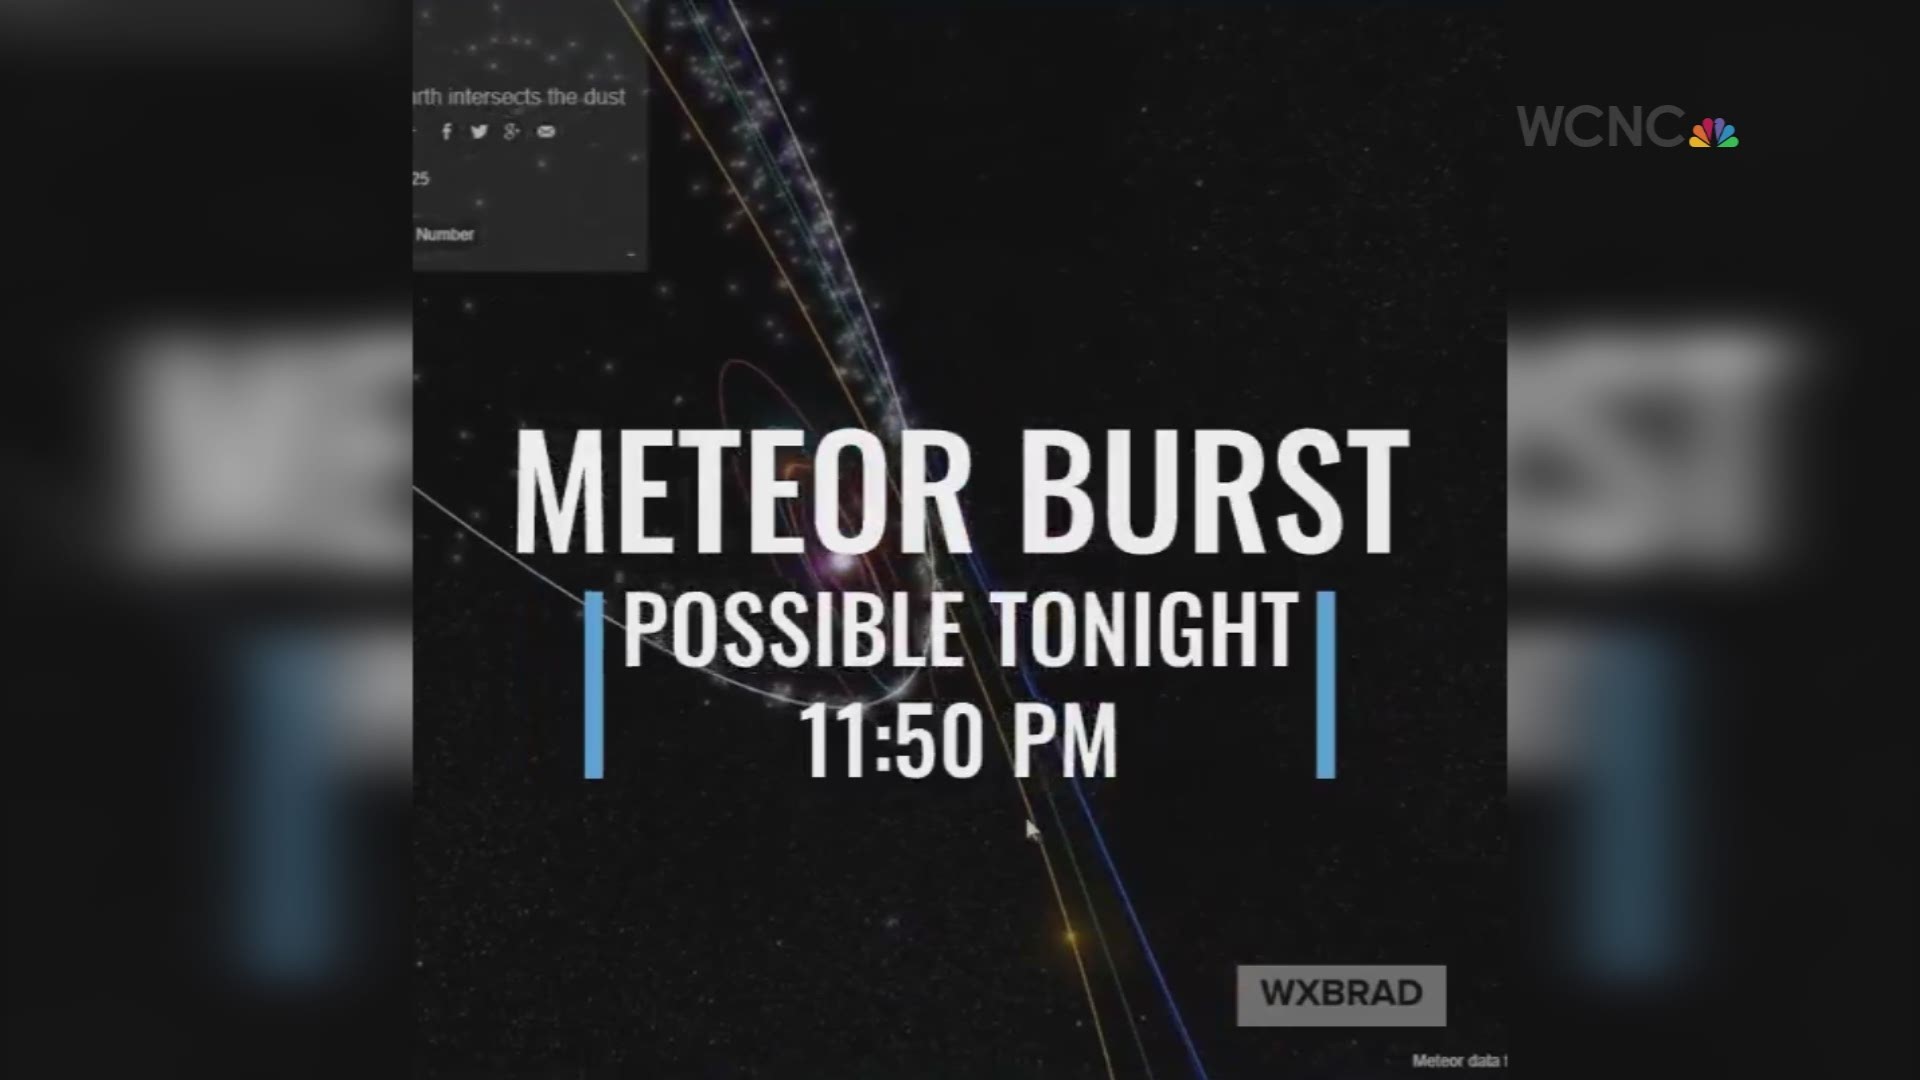 Charlotte has a chance to see meteors late Thursday night from a mysterious comet passing through the atmosphere.